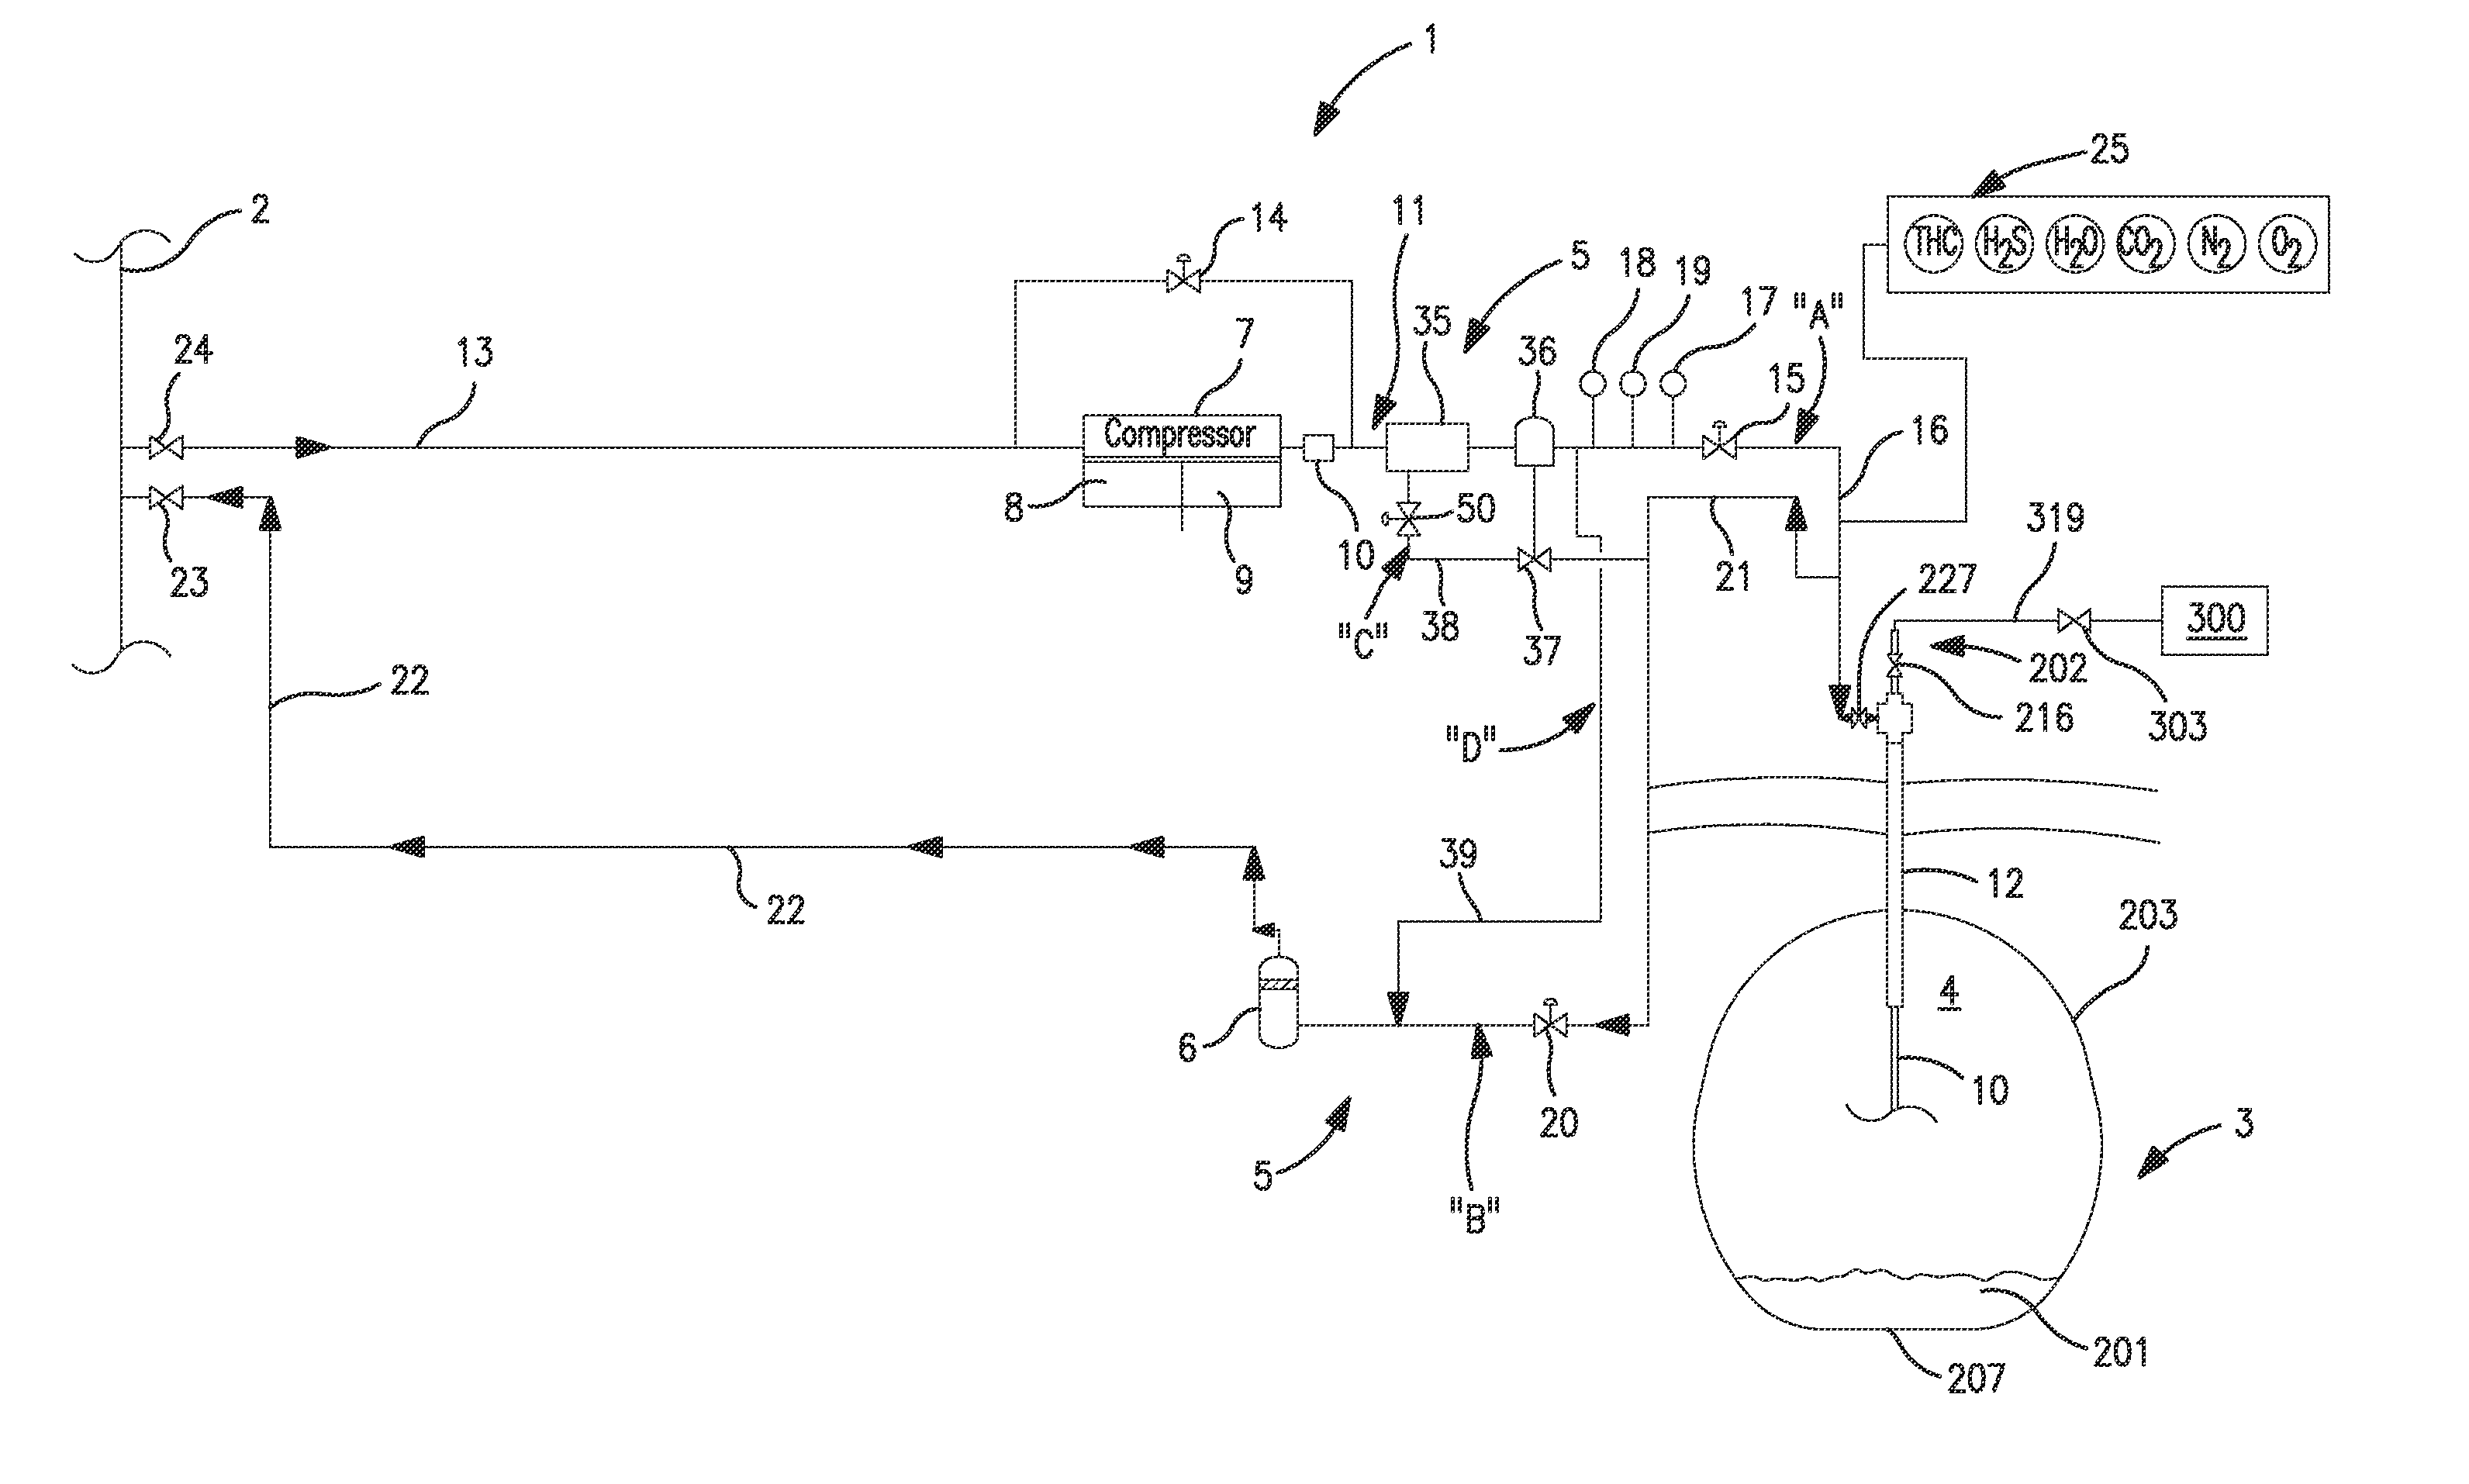 System and method for treating hydrogen to be stored in a salt cavern and supplying therefrom